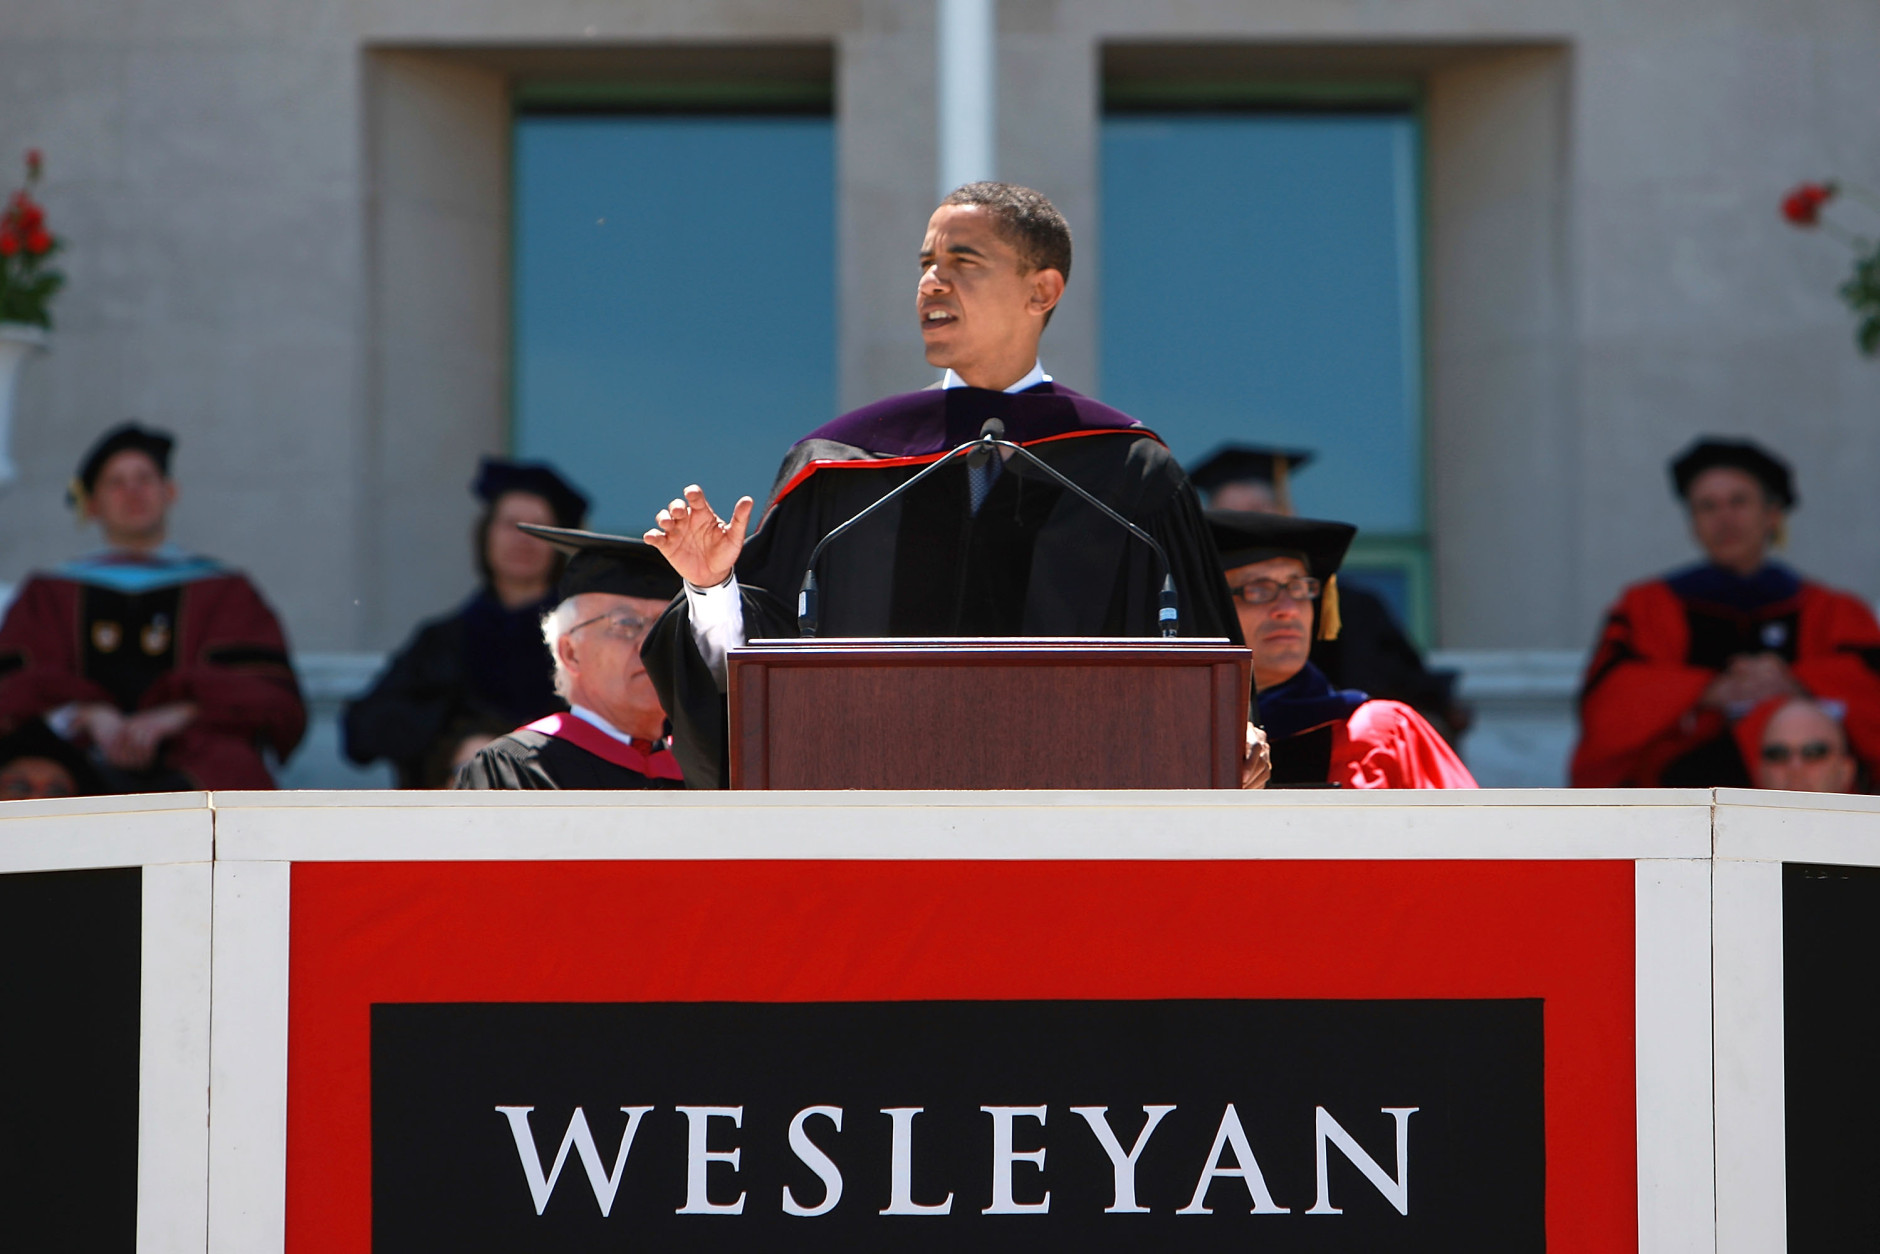 MIDDLETOWN, CT - MAY 25:  Sen. Barack Obama (D-IL) delivers the commencement address at Wesleyan University May 25, 2008 in Middletown, Connecticut. Obama is stepping in for Sen. Edward M. Kennedy, who was diagnosed this week with a cancerous brain tumor.  (Photo by Spencer Platt/Getty Images)